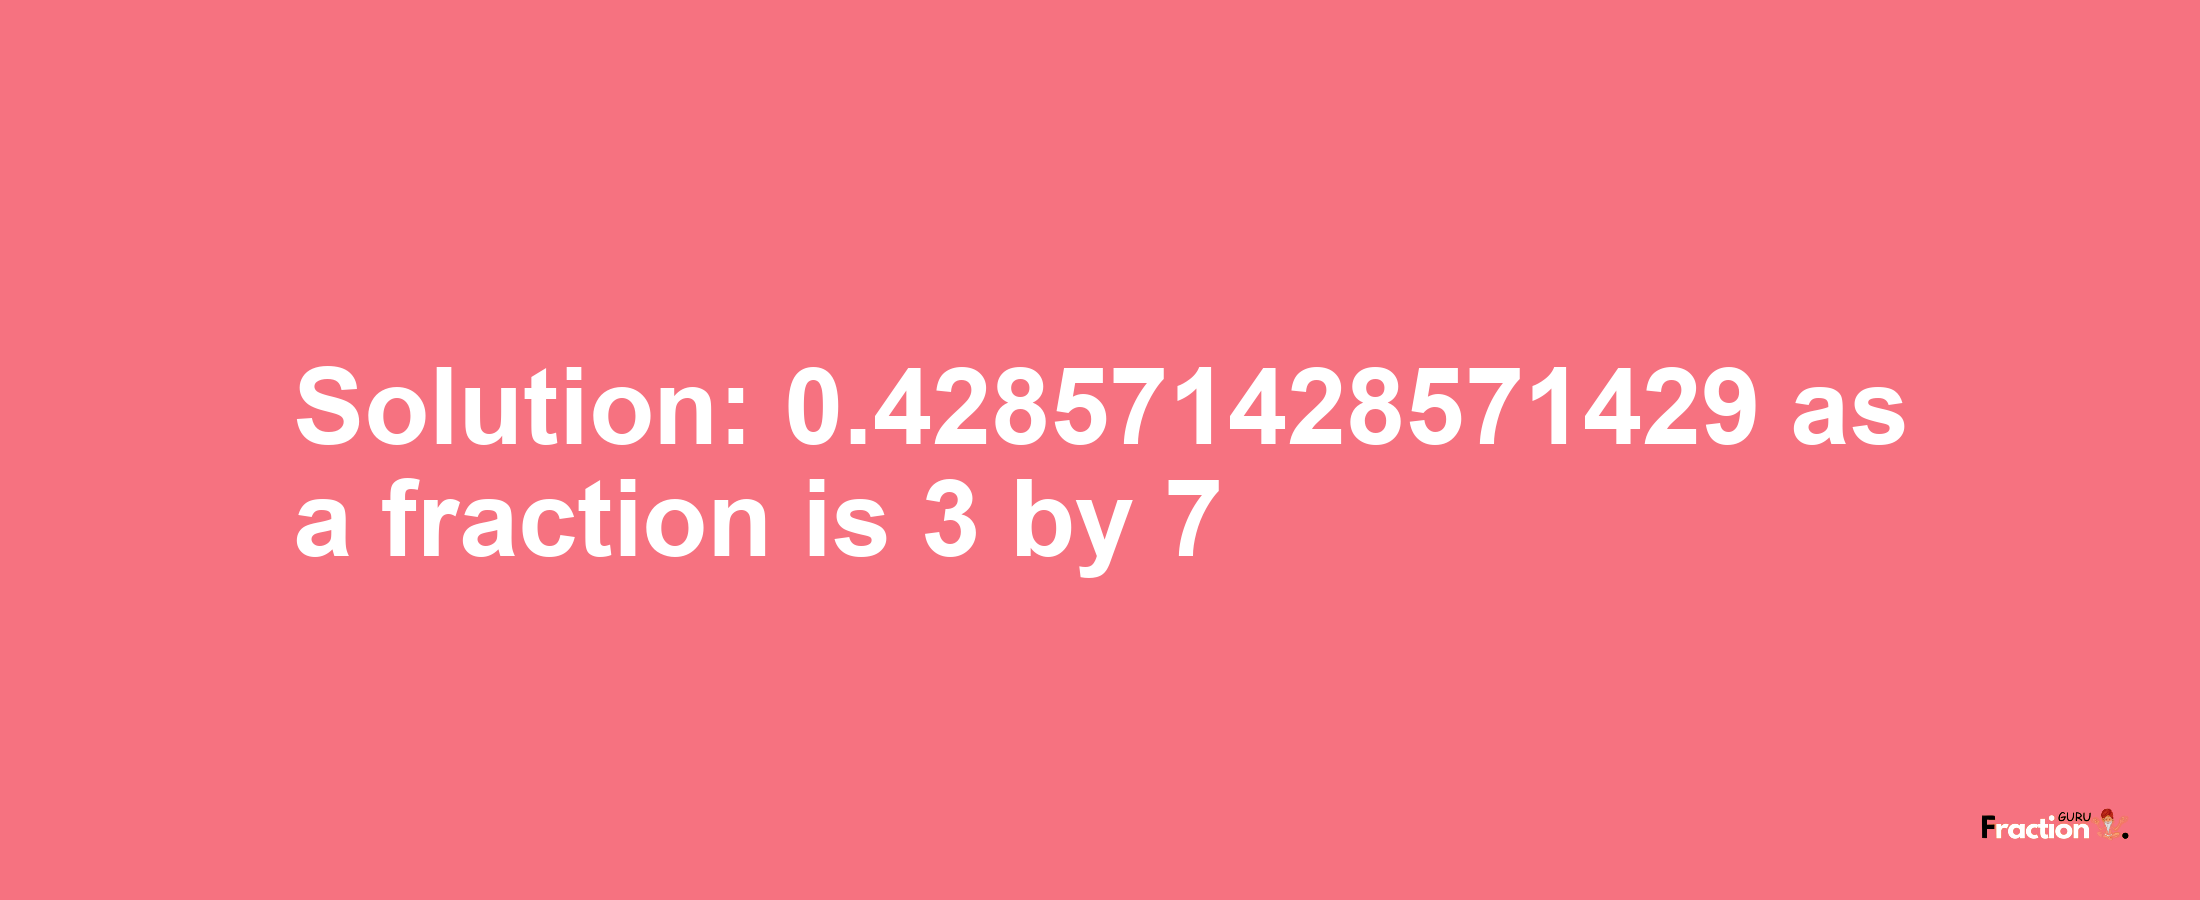 Solution:0.428571428571429 as a fraction is 3/7